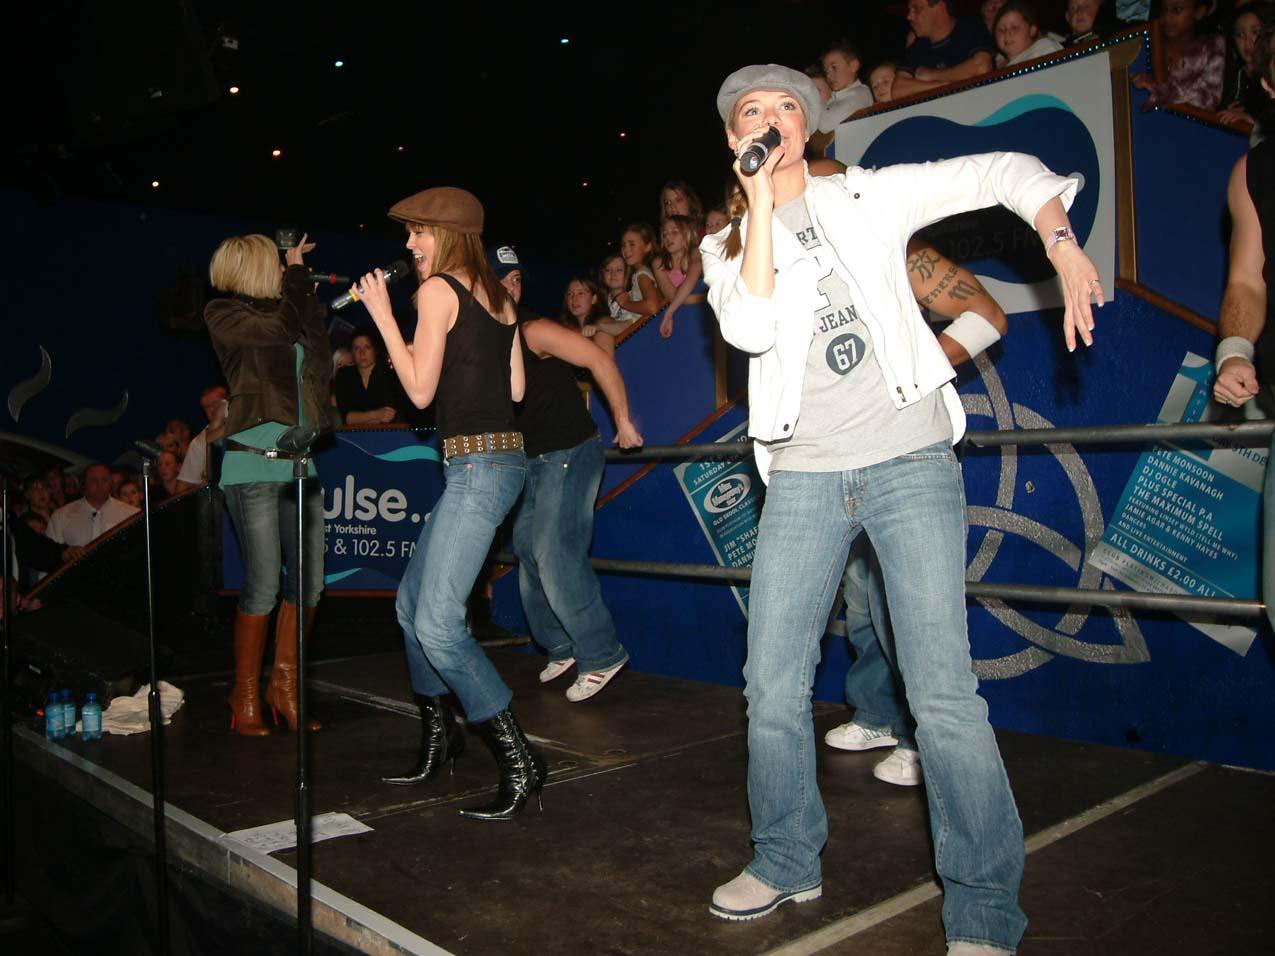 Back in 2003, this popular girl group performed at a town centre nightclub for crowds of fans. The bands hits include The Tide is High (Get The Feeling) and Eternal Flame.